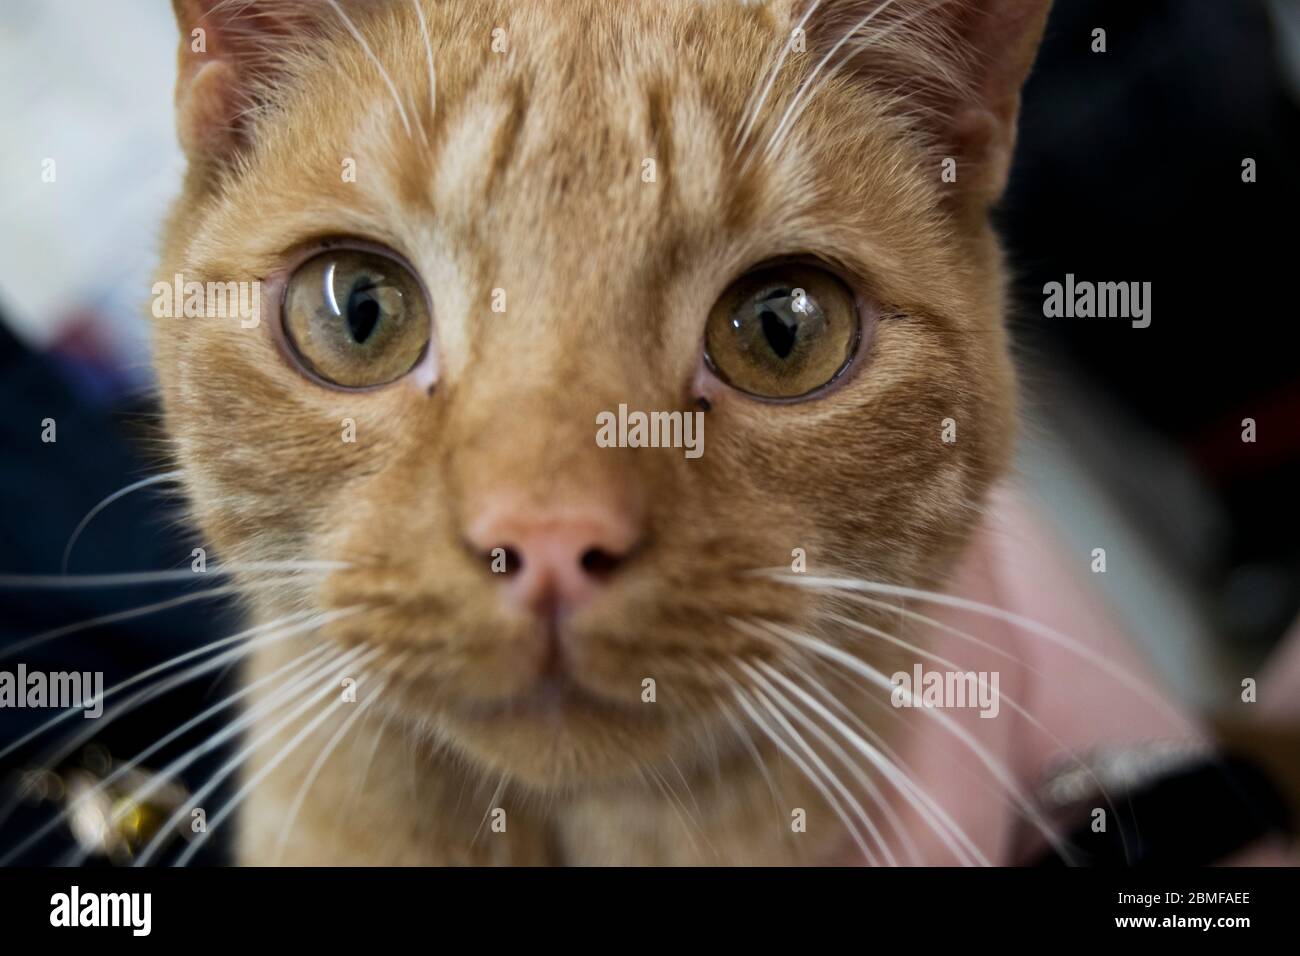 Huge eyes on a small ginger rescue kitten Stock Photo